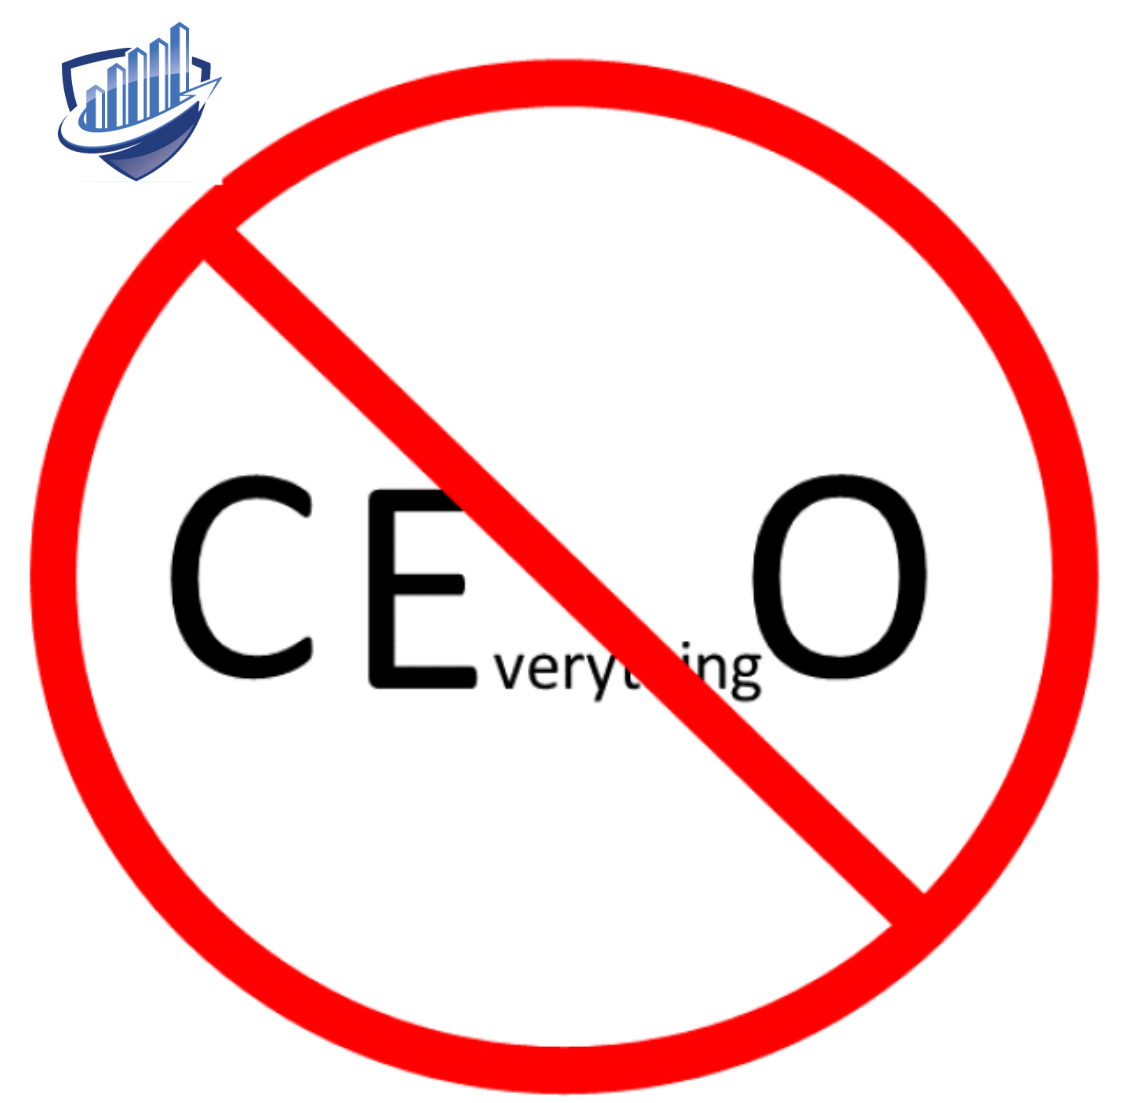 Red circle with a diagonal line through it over the text "CEverythingO". 
Business Systems mean you don't have to be the CEO of everything, just the CEO tasks.